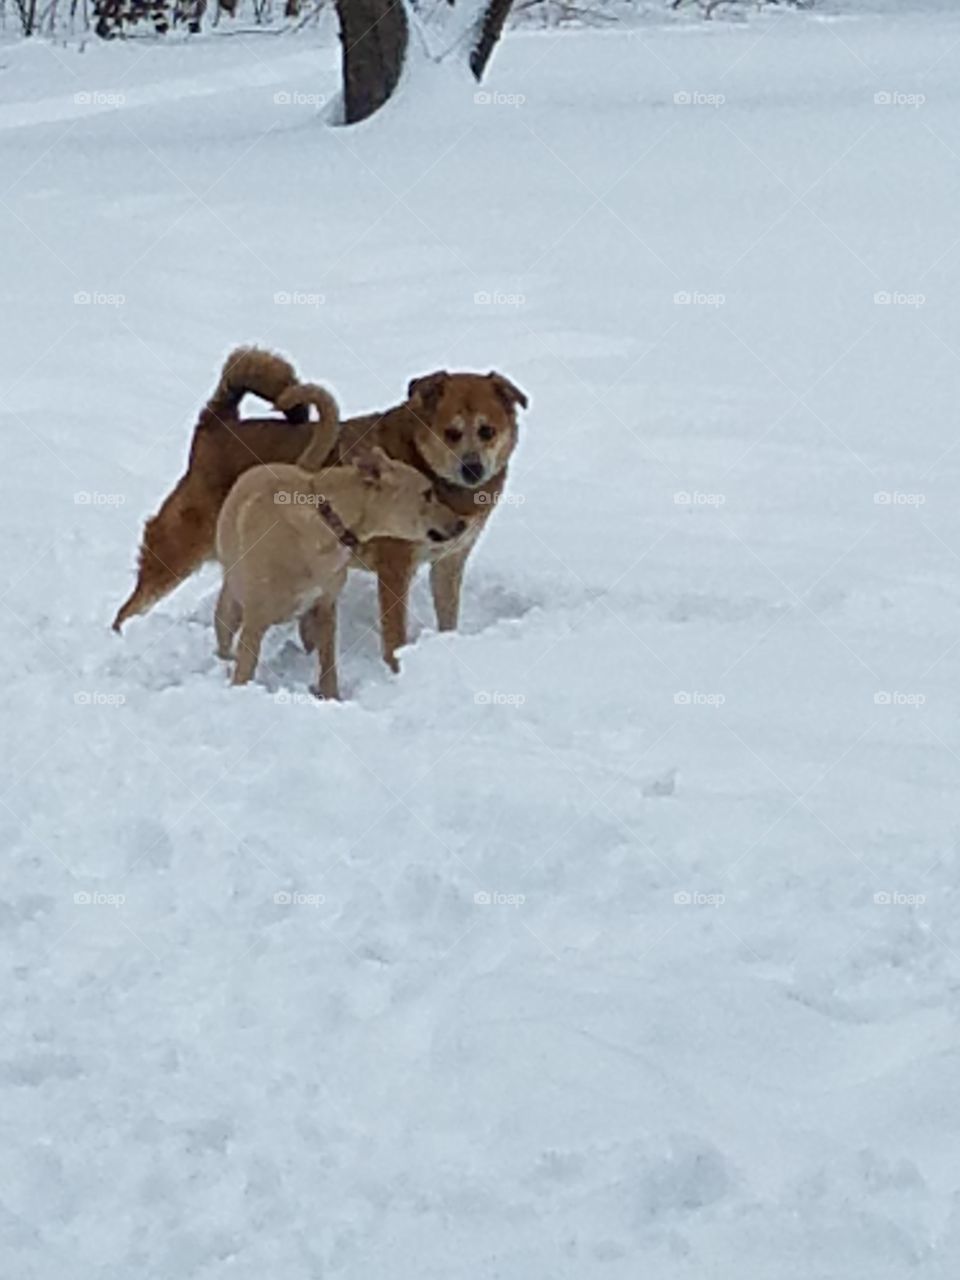 Zoey and No, dogs in the snow